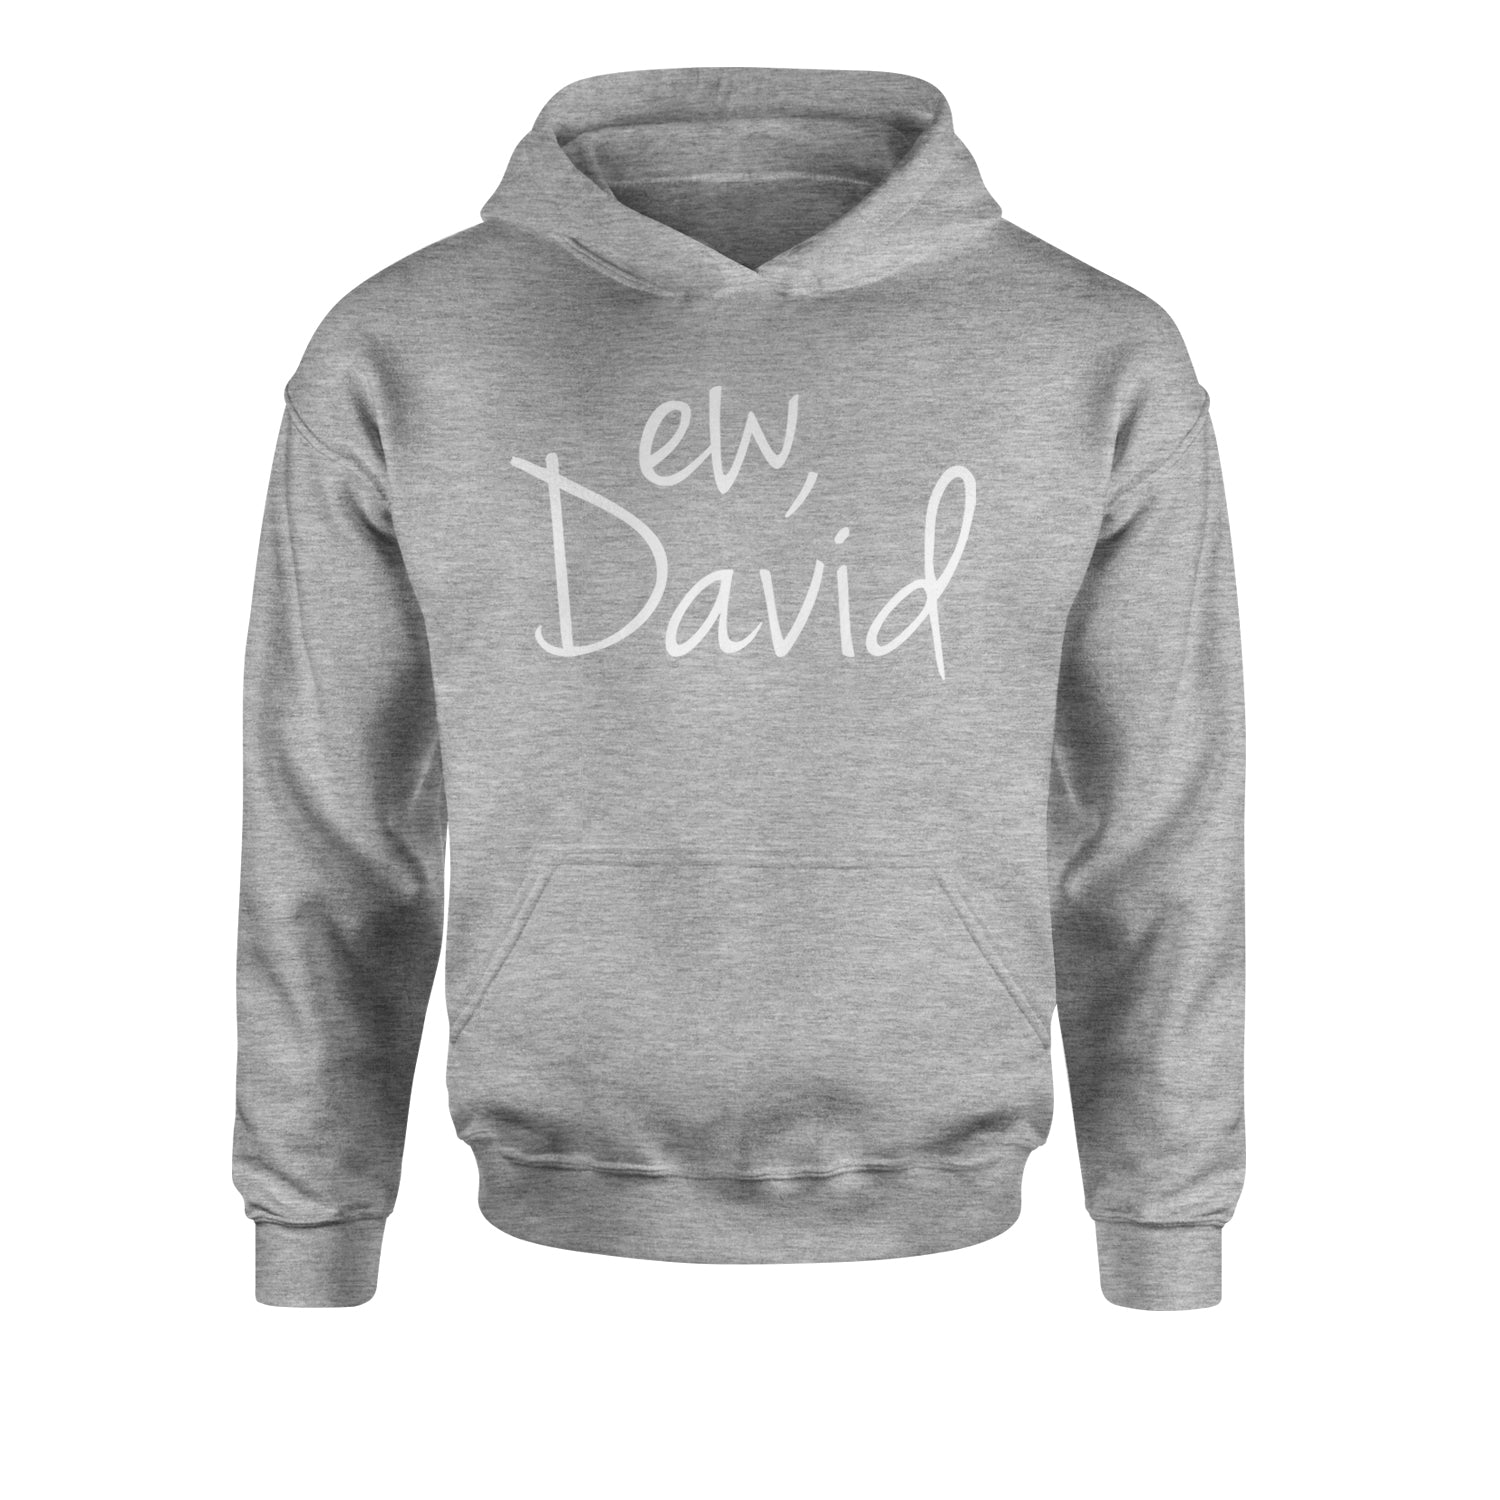 Ew, David Funny Creek TV Show Youth-Sized Hoodie alexis, bit, david, eugene, levy, little, nonchalance, schitt by Expression Tees